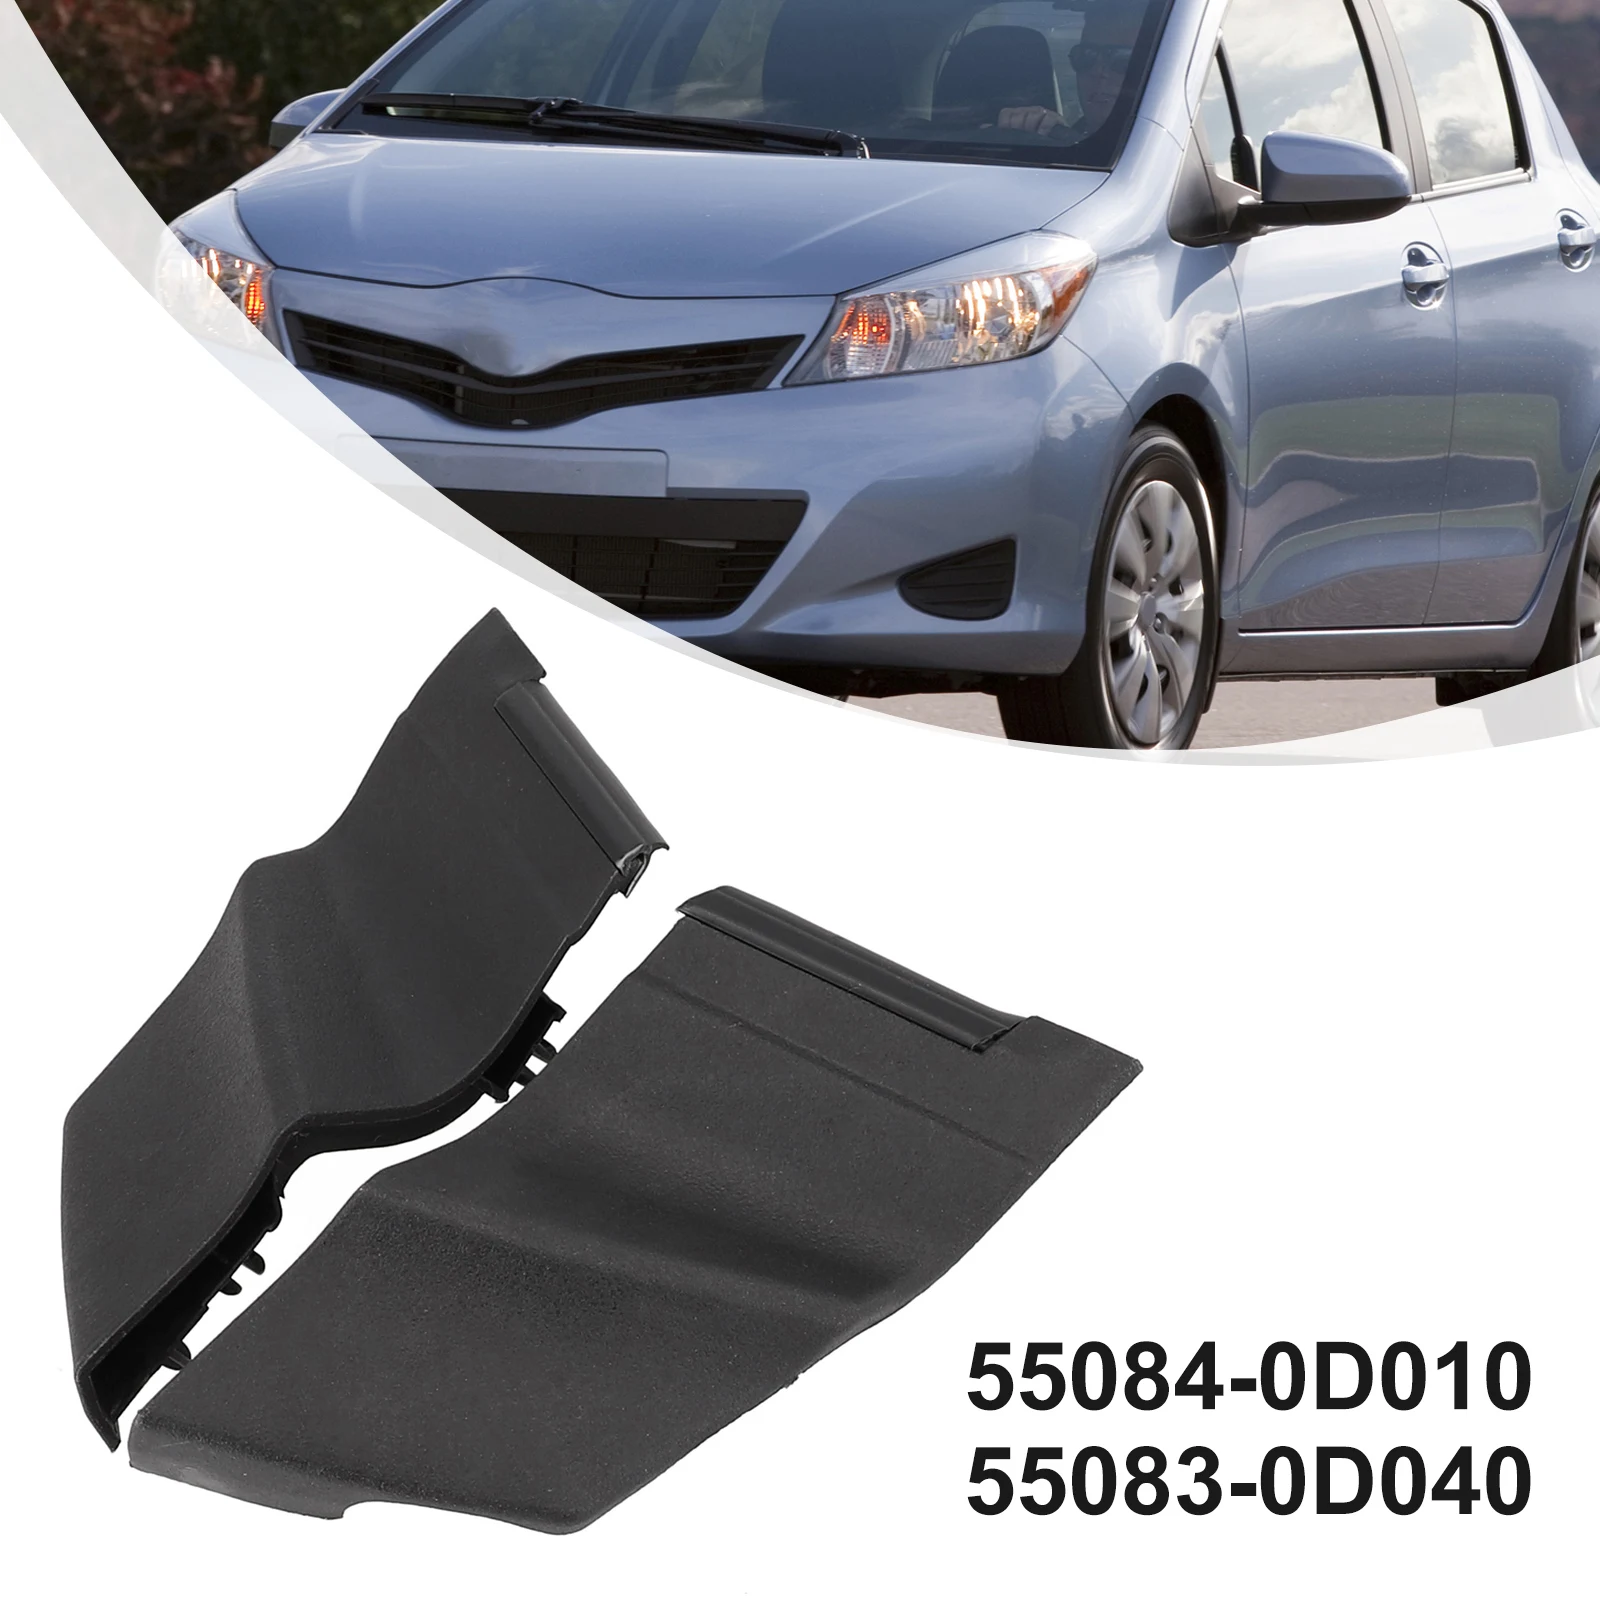 

Brand New Windshield Cover Windshield Cover For Yaris 4-Door 2006-2010 Plastic Windshield Wiper Side 2X Black Cowl Cover Trim